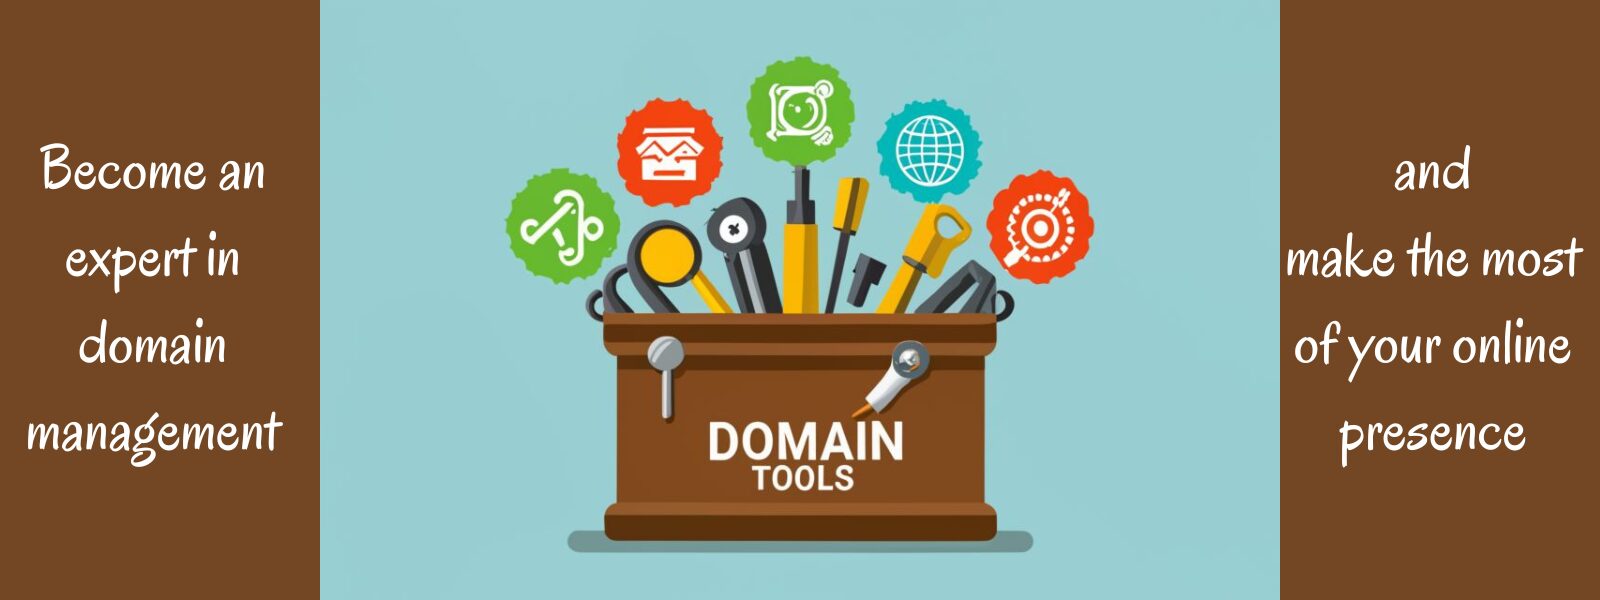 best domain tools to help you make the most of your online presence